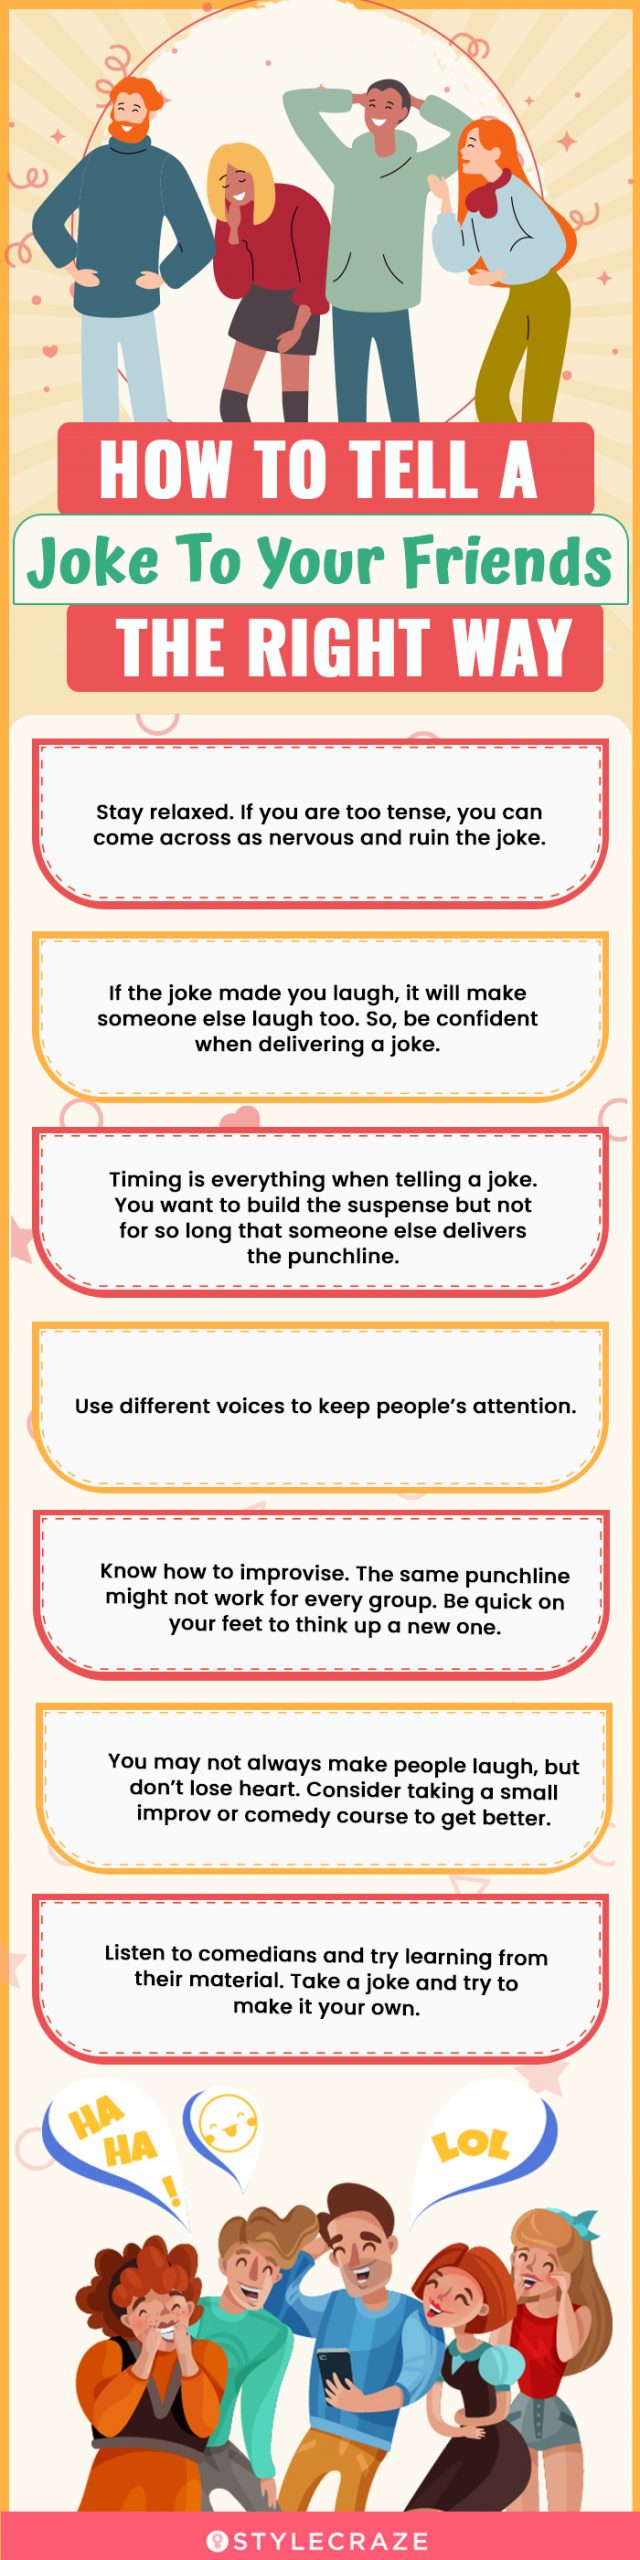 how to tell a joke to your friends the right way (infographic)